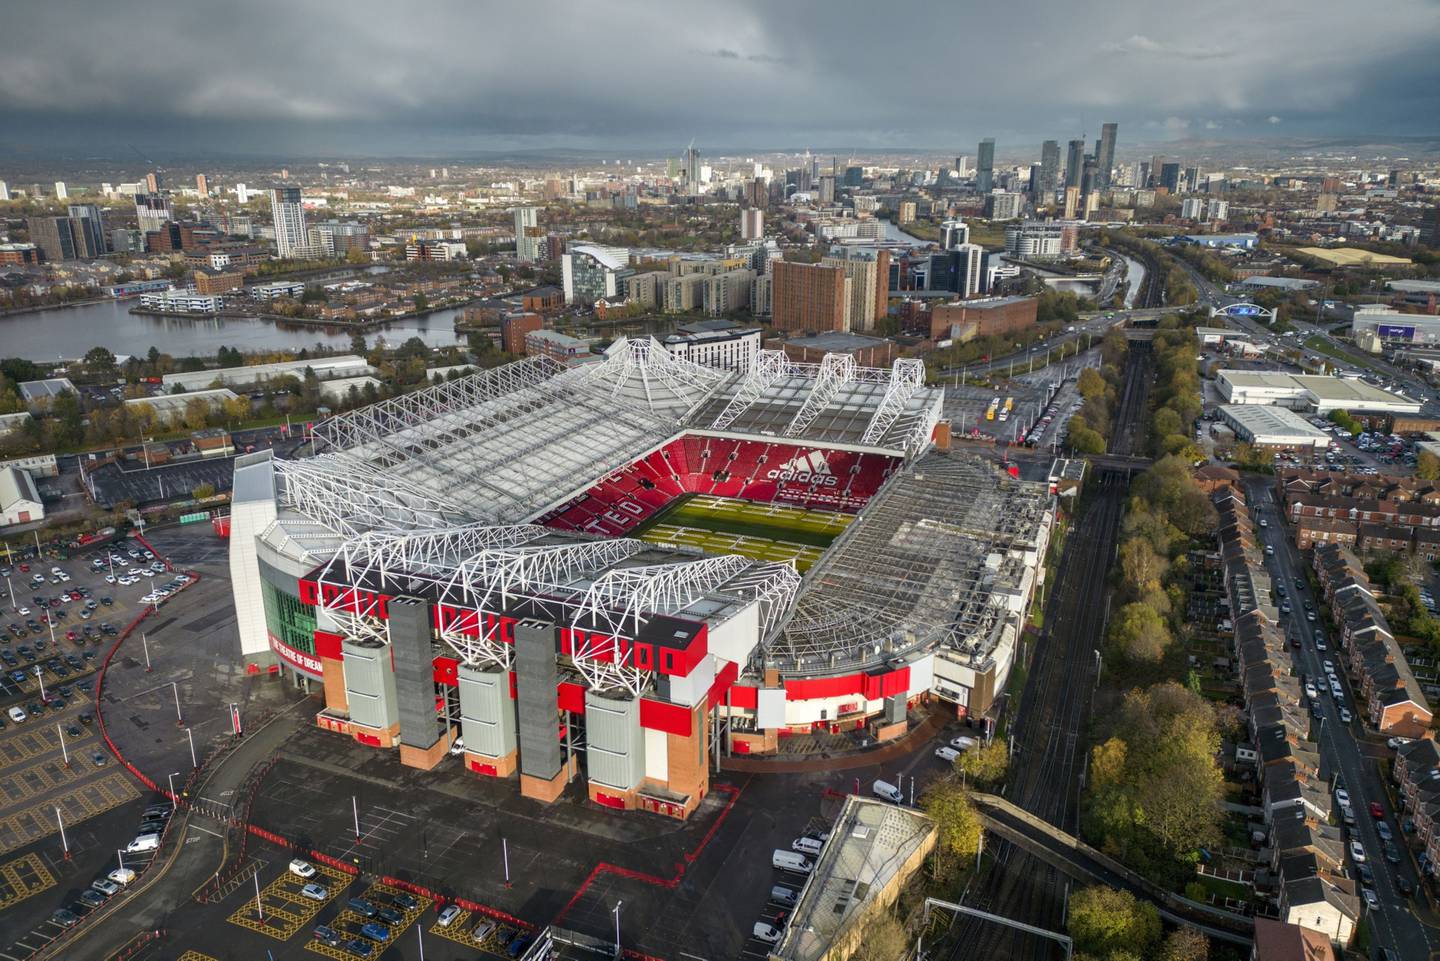 MANCHESTER, ENGLAND - NOVEMBER 23: An aerial view of Old Trafford Stadium, the home of Manchester United Football Club on November 23, 2022 in Manchester, England. Yesterday, the club released a statement indicating that the Glazer family who are majority owners of the club said they will "consider all strategic alternatives, including new investment into the club, a sale, or other transactions involving the company". The announcement came on the same day the club announced its star player, Cristiano Ronaldo, was leaving with immediate effect. (Photo by Christopher Furlong/Getty Images)